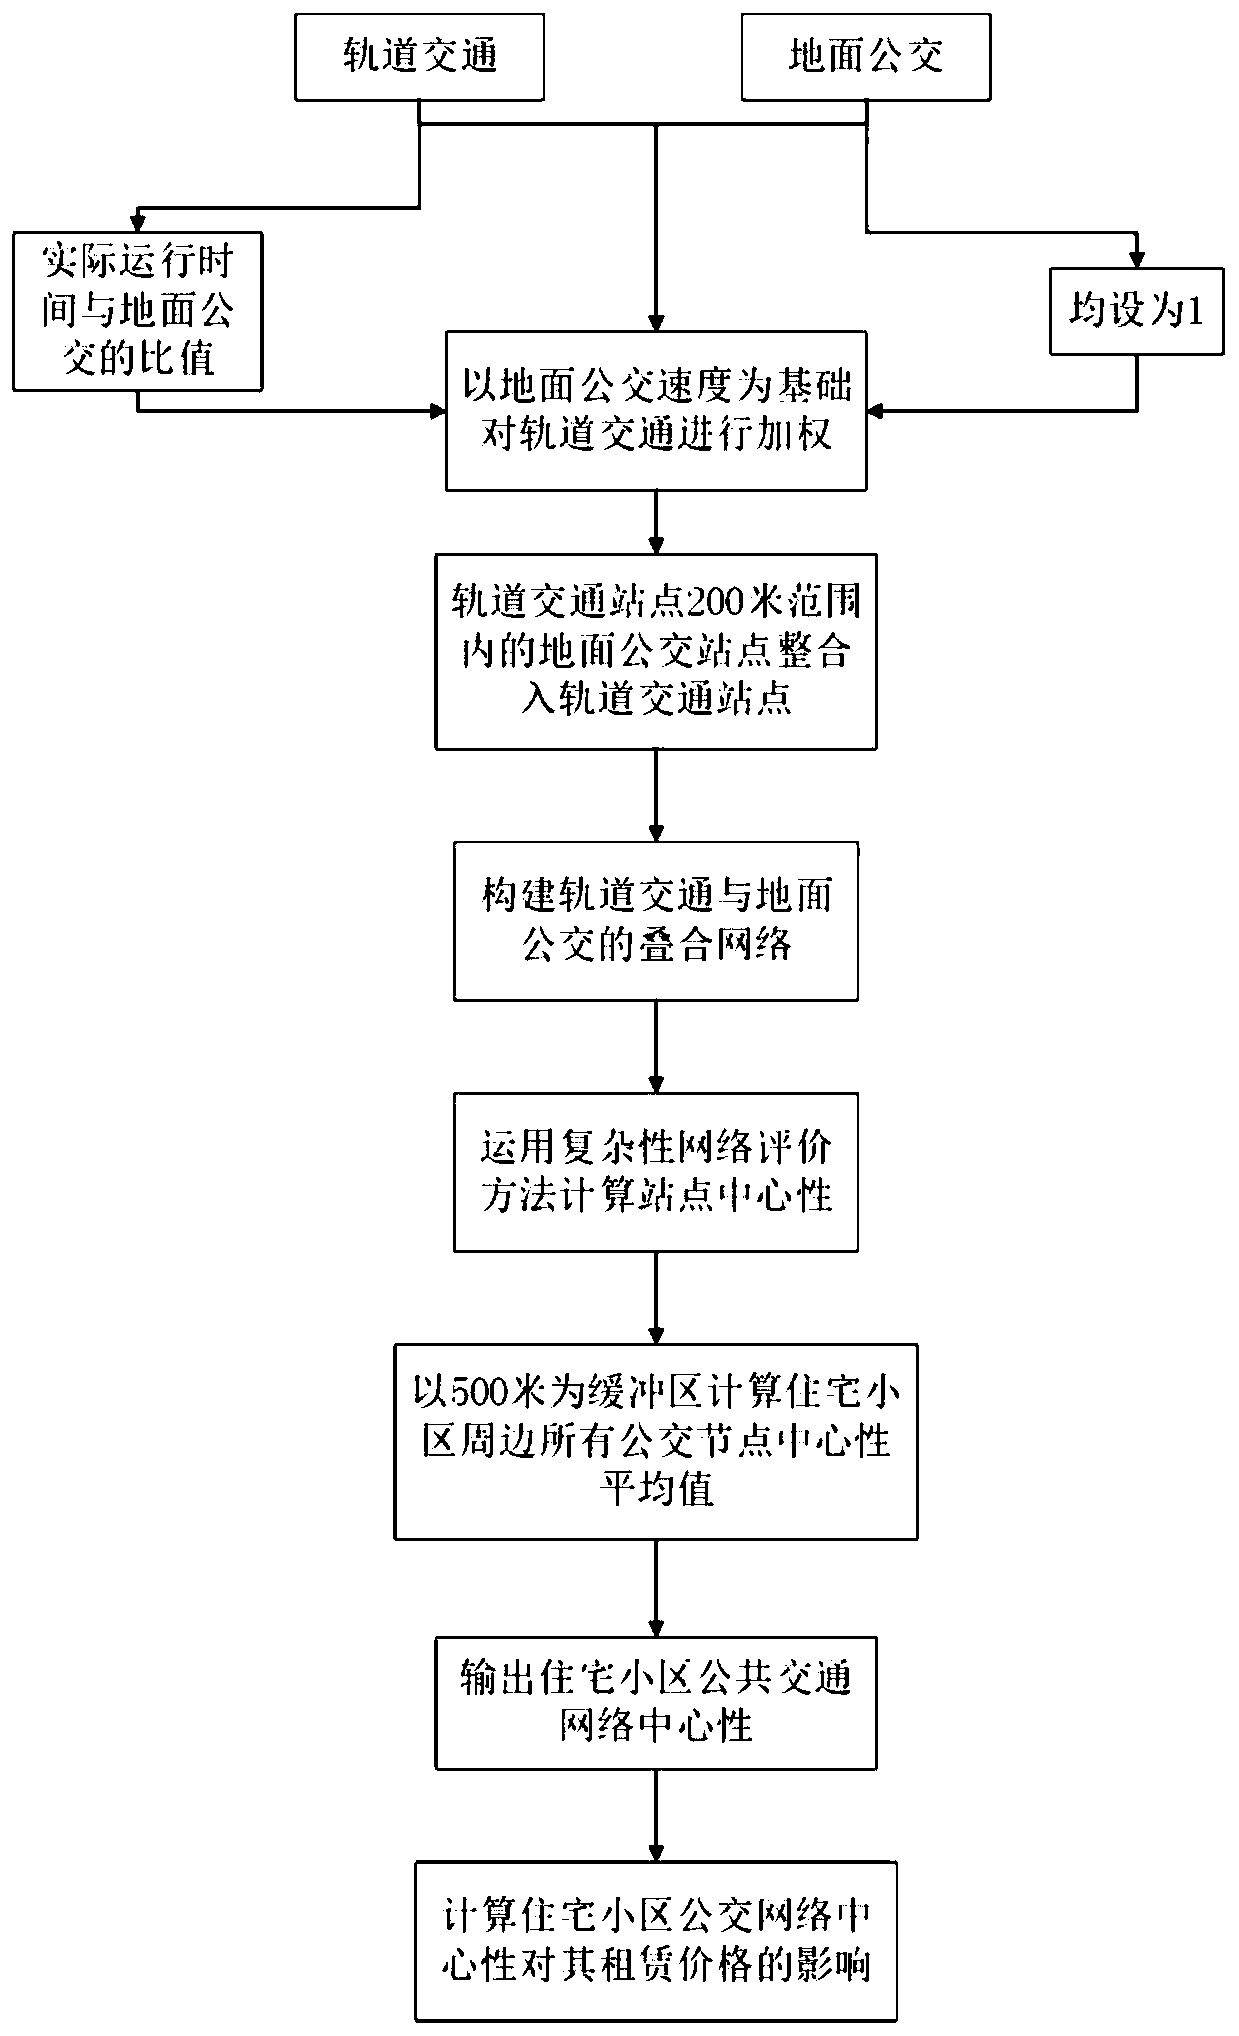 Complex network analysis and spatial effect evaluation method